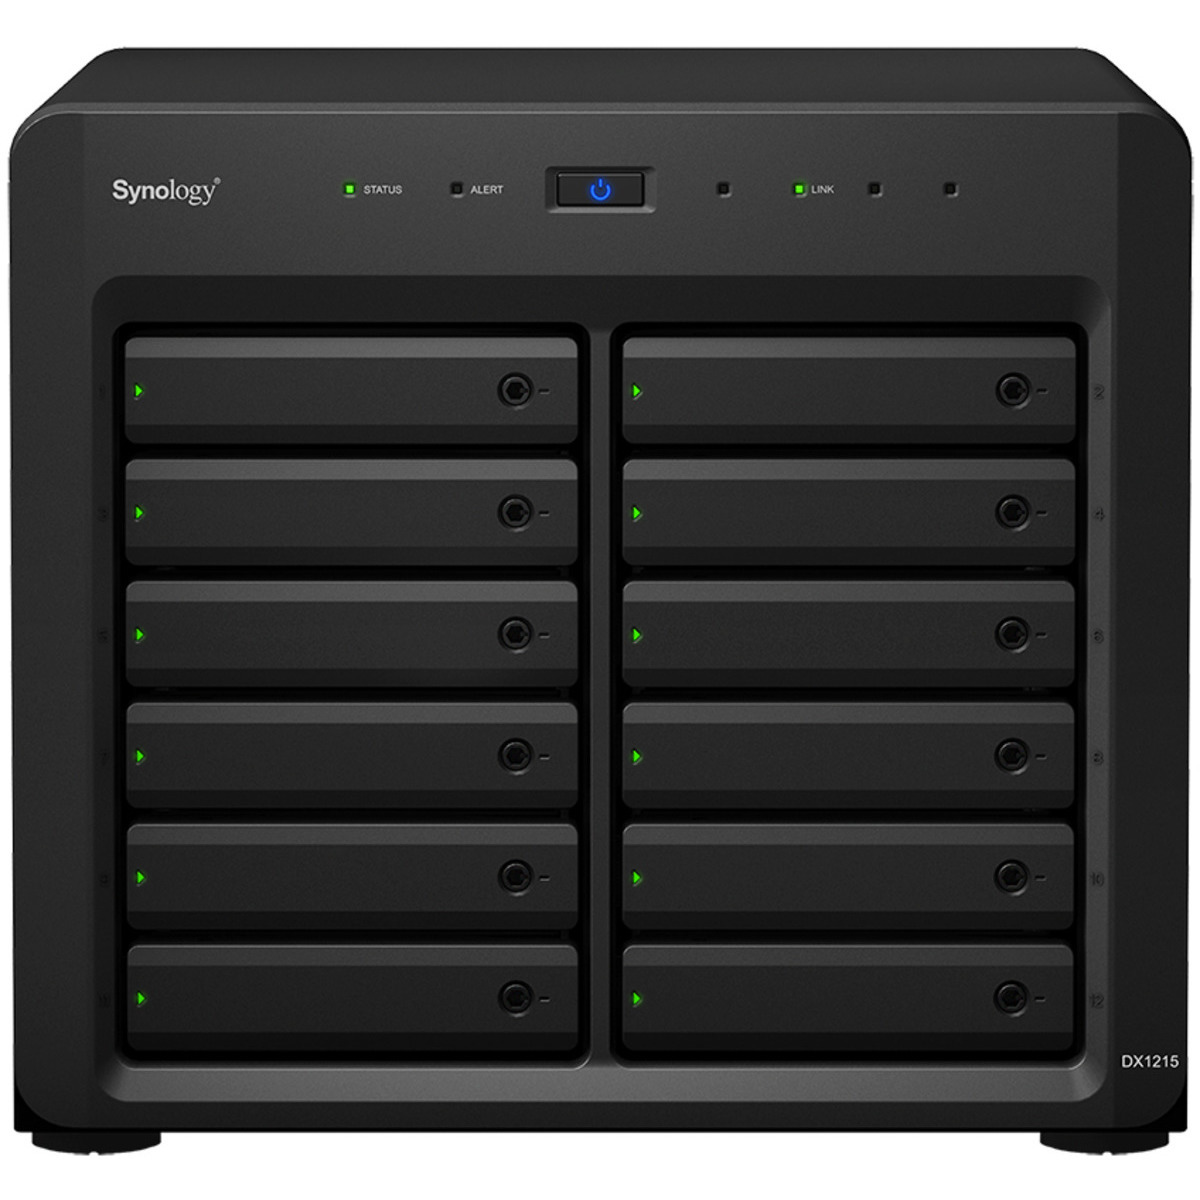 Synology DX1215II External Expansion Drive 70tb 12-Bay Desktop Multimedia / Power User / Business Expansion Enclosure 7x10tb Seagate IronWolf Pro ST10000NT001 3.5 7200rpm SATA 6Gb/s HDD NAS Class Drives Installed - Burn-In Tested - ON SALE DX1215II External Expansion Drive